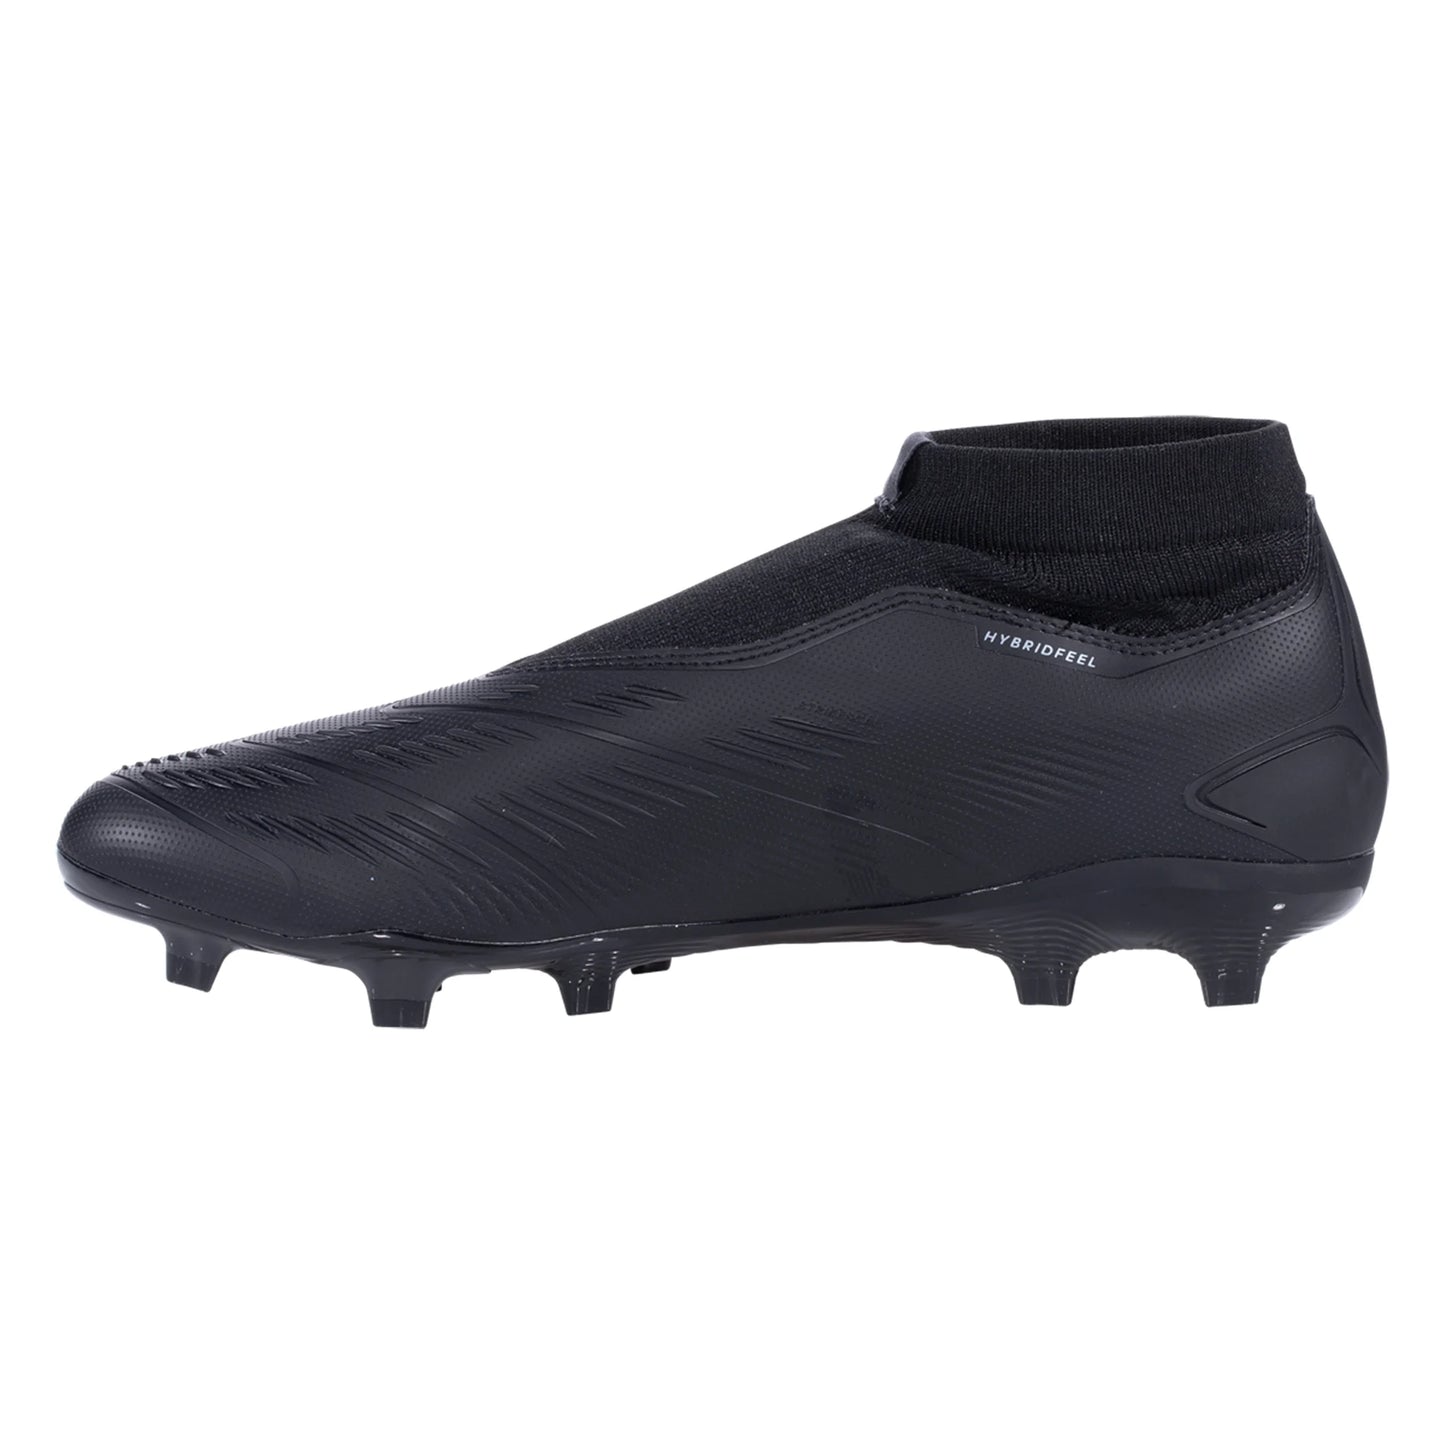 Adidas Predator League Laceless FG Firm Ground Soccer Cleat